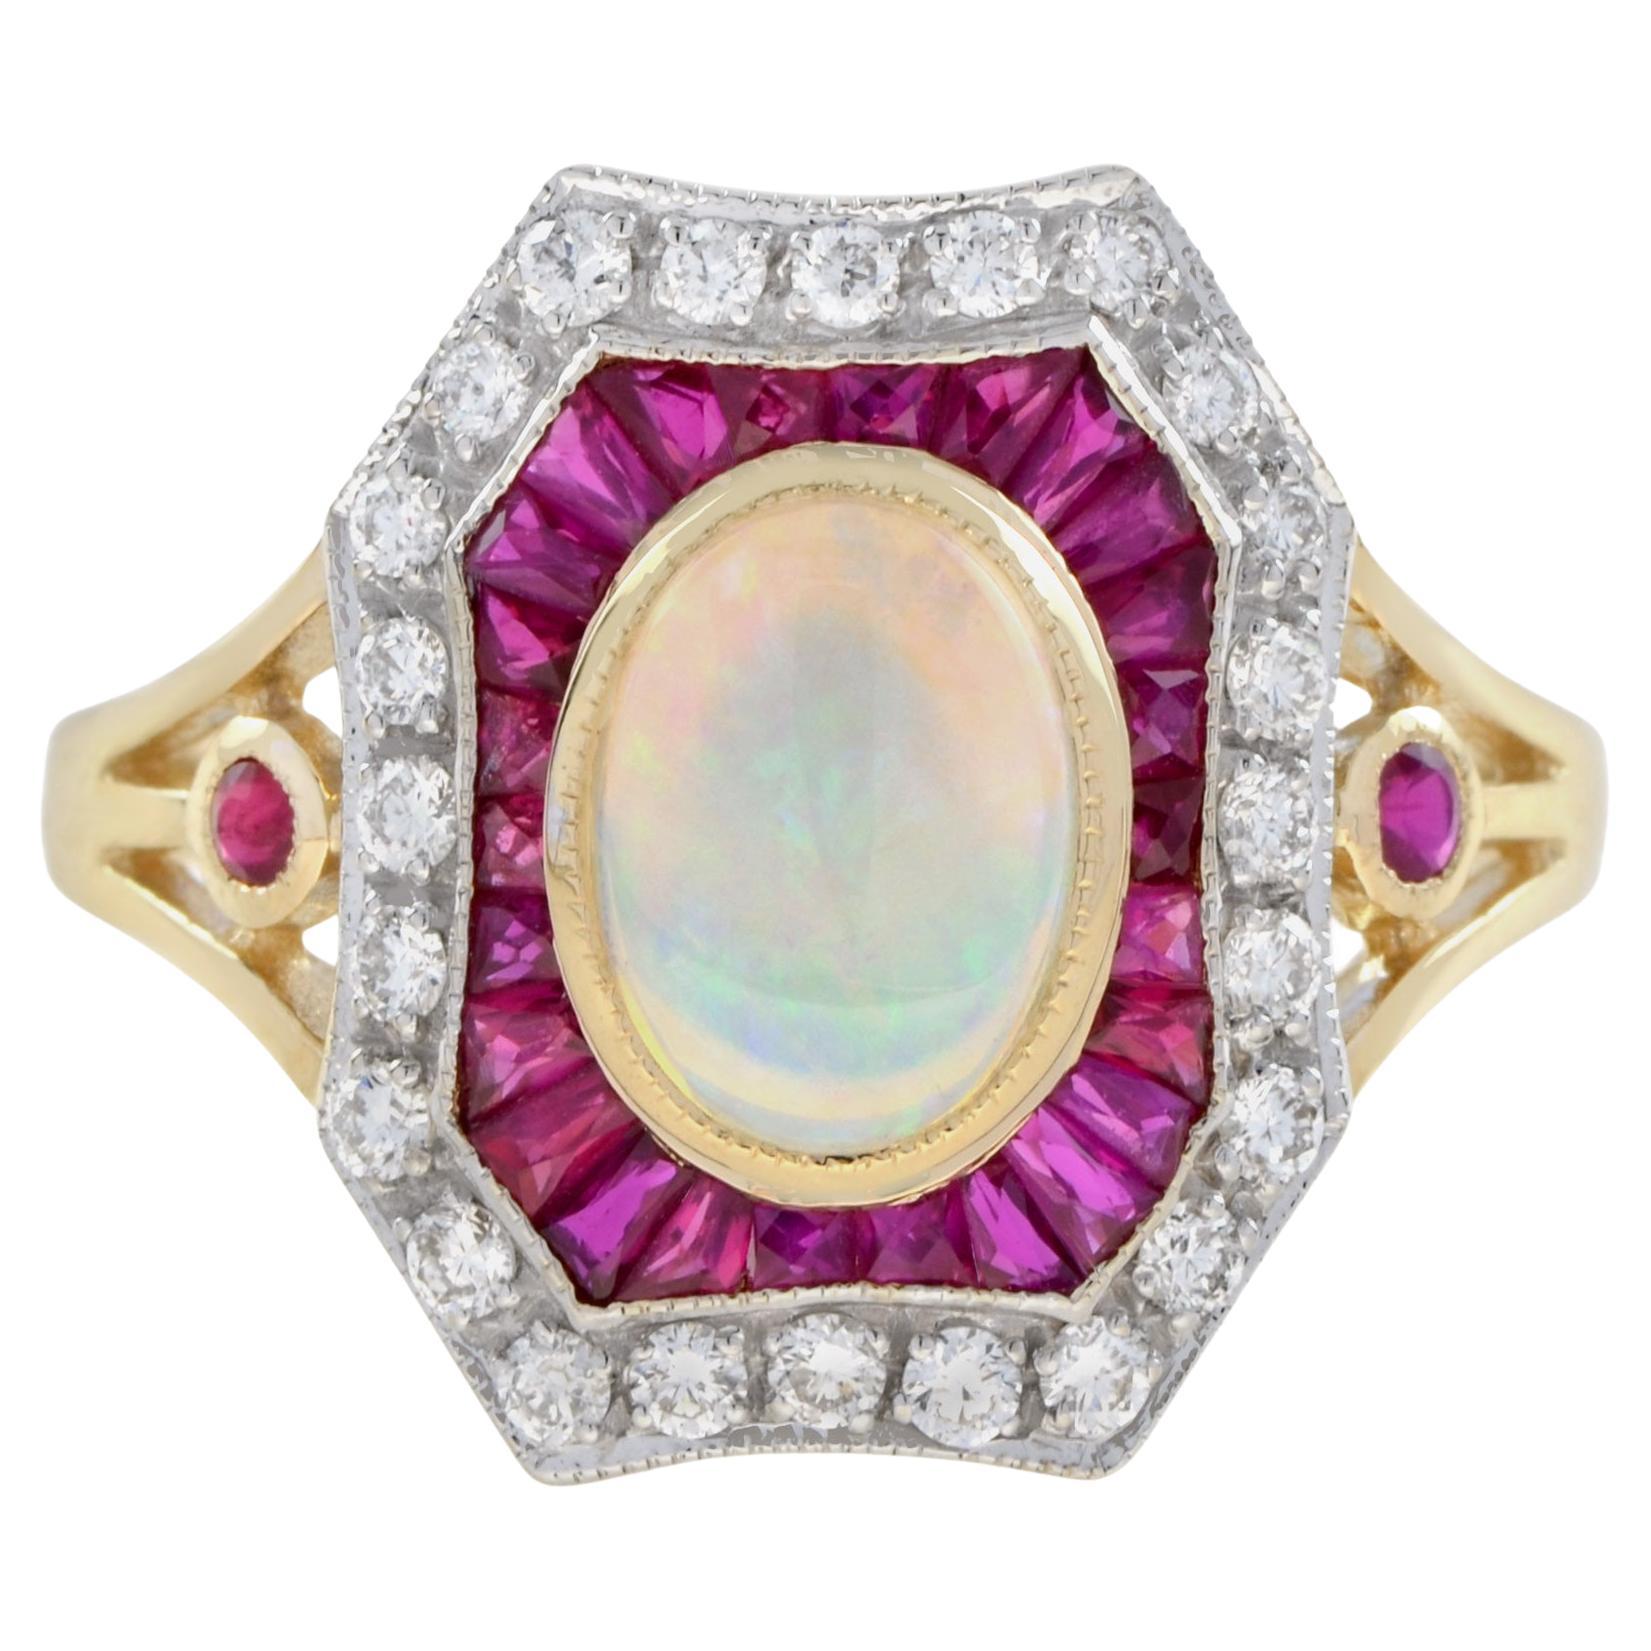 Australian Opal with Ruby Diamond Art Deco Style Halo Ring in 14K Yellow Gold For Sale